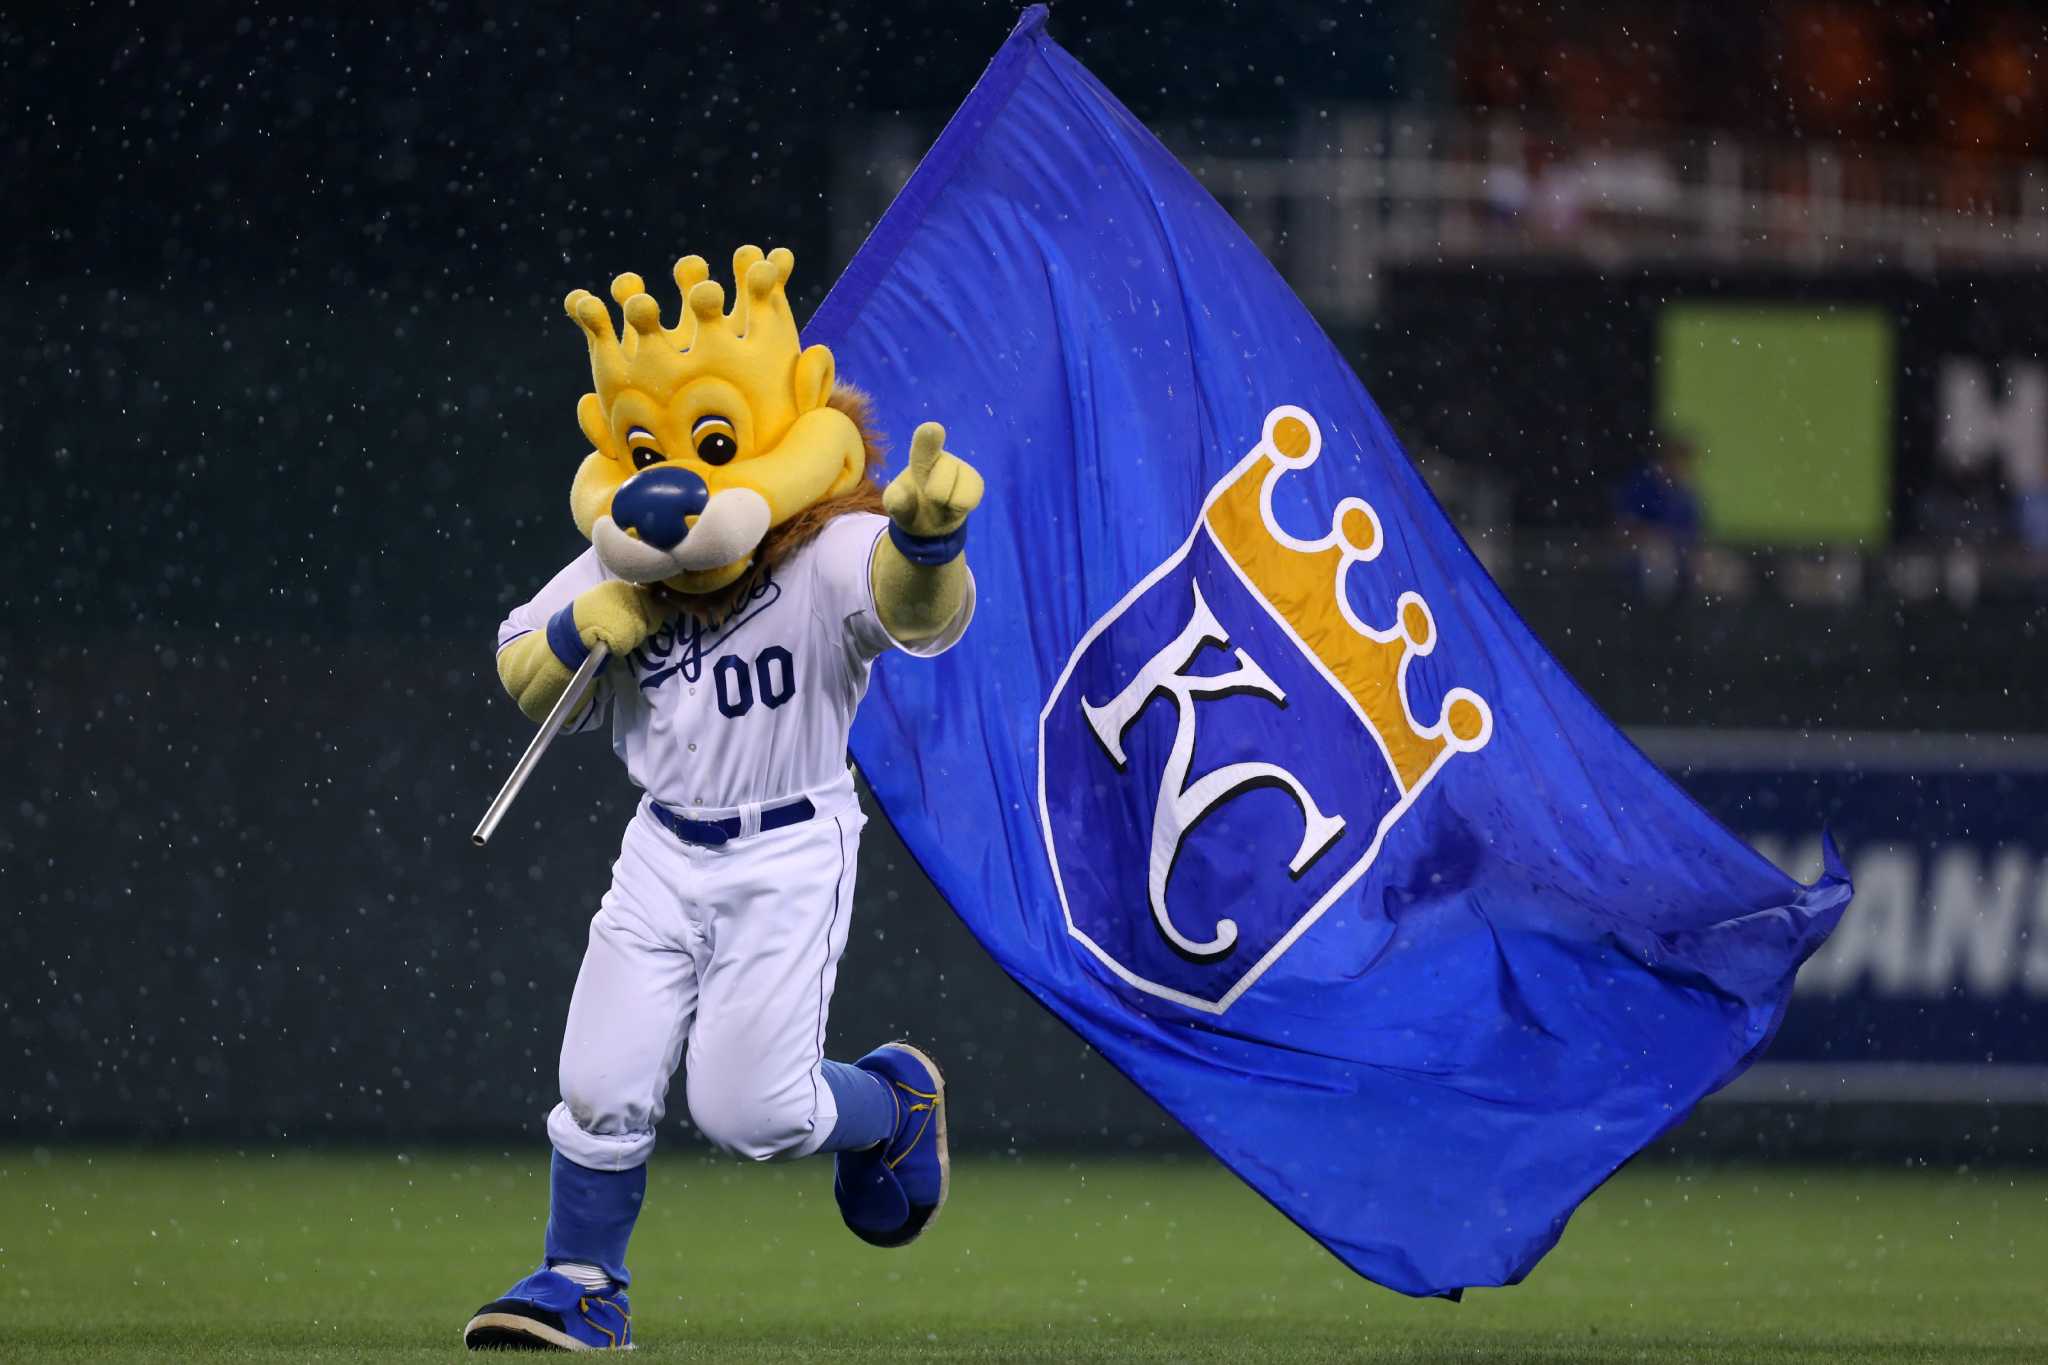 Any one know what is going on with Sluggerrr's Blue Crew? I get